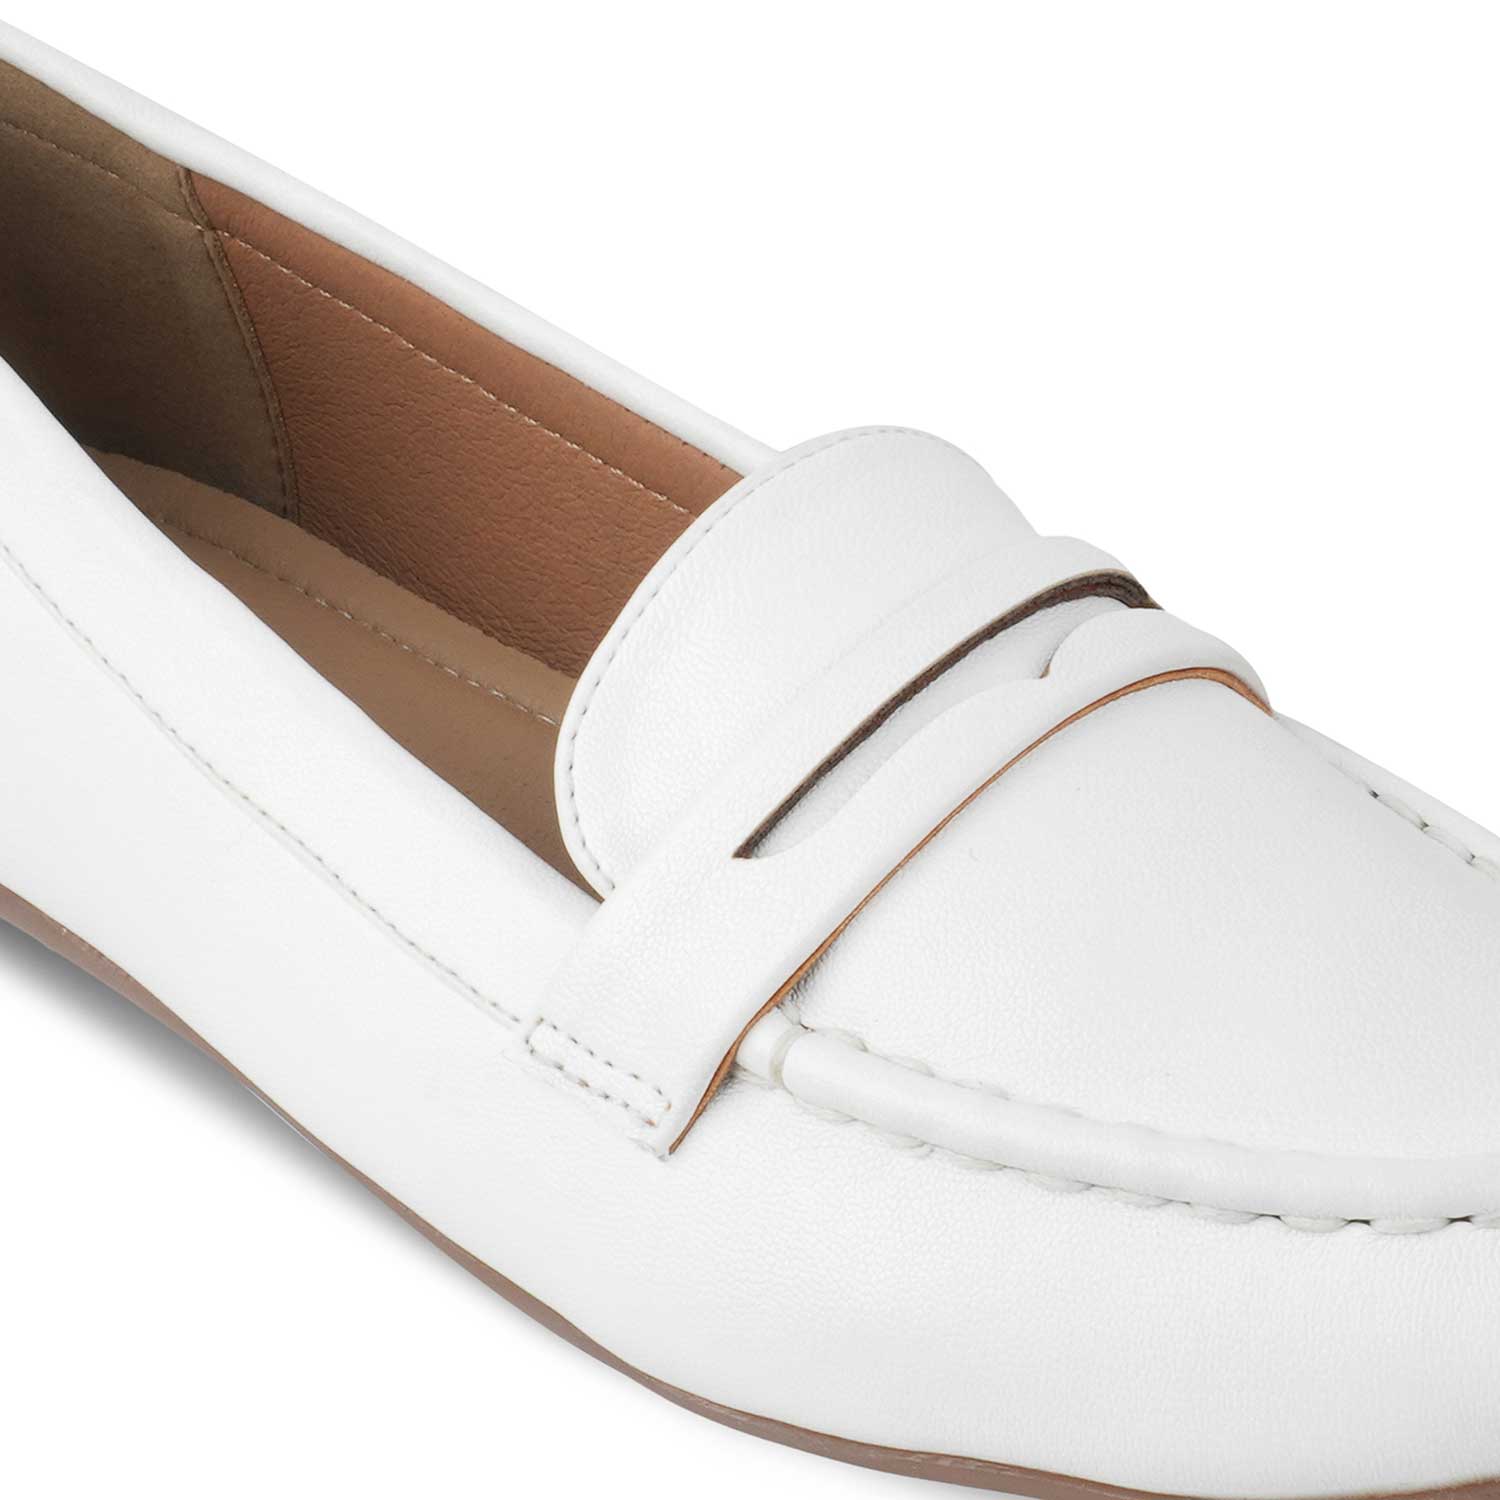 The Snap White Women's Casual Loafers Tresmode